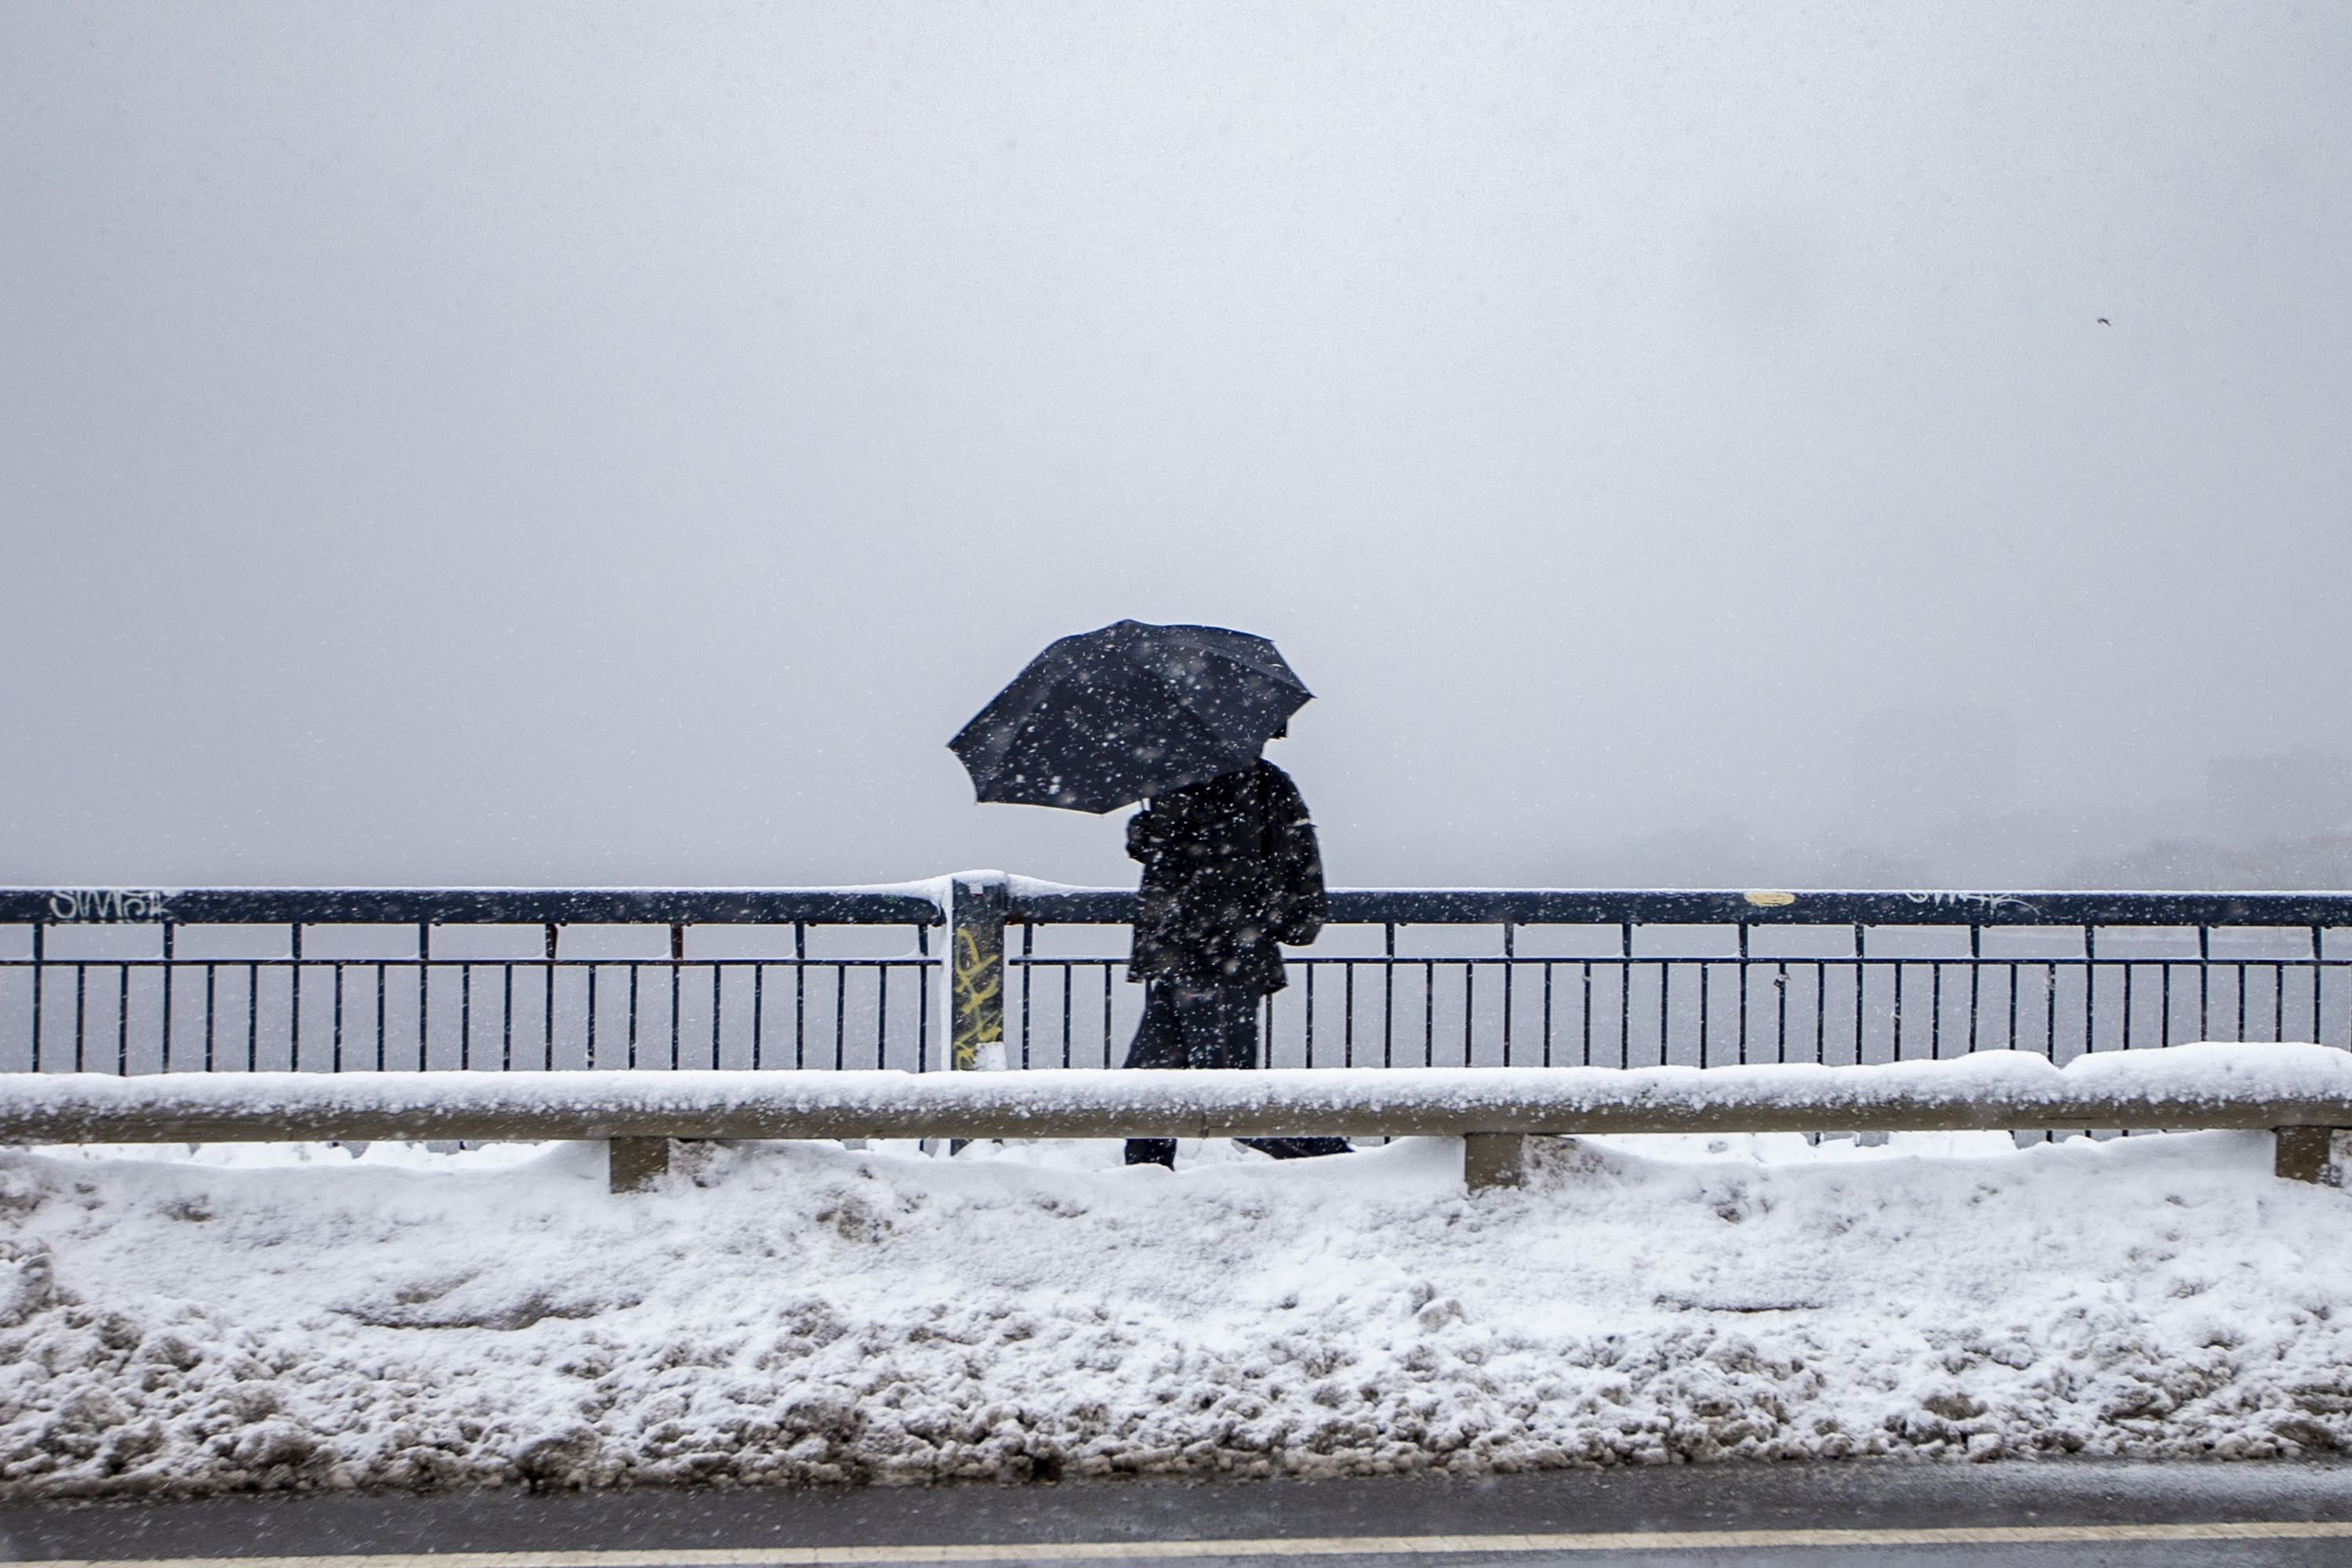 A man with an umbrella walks across the Massachusetts Avenue Bridge early Friday morning during the snowstorm. (Jesse Costa/WBUR)